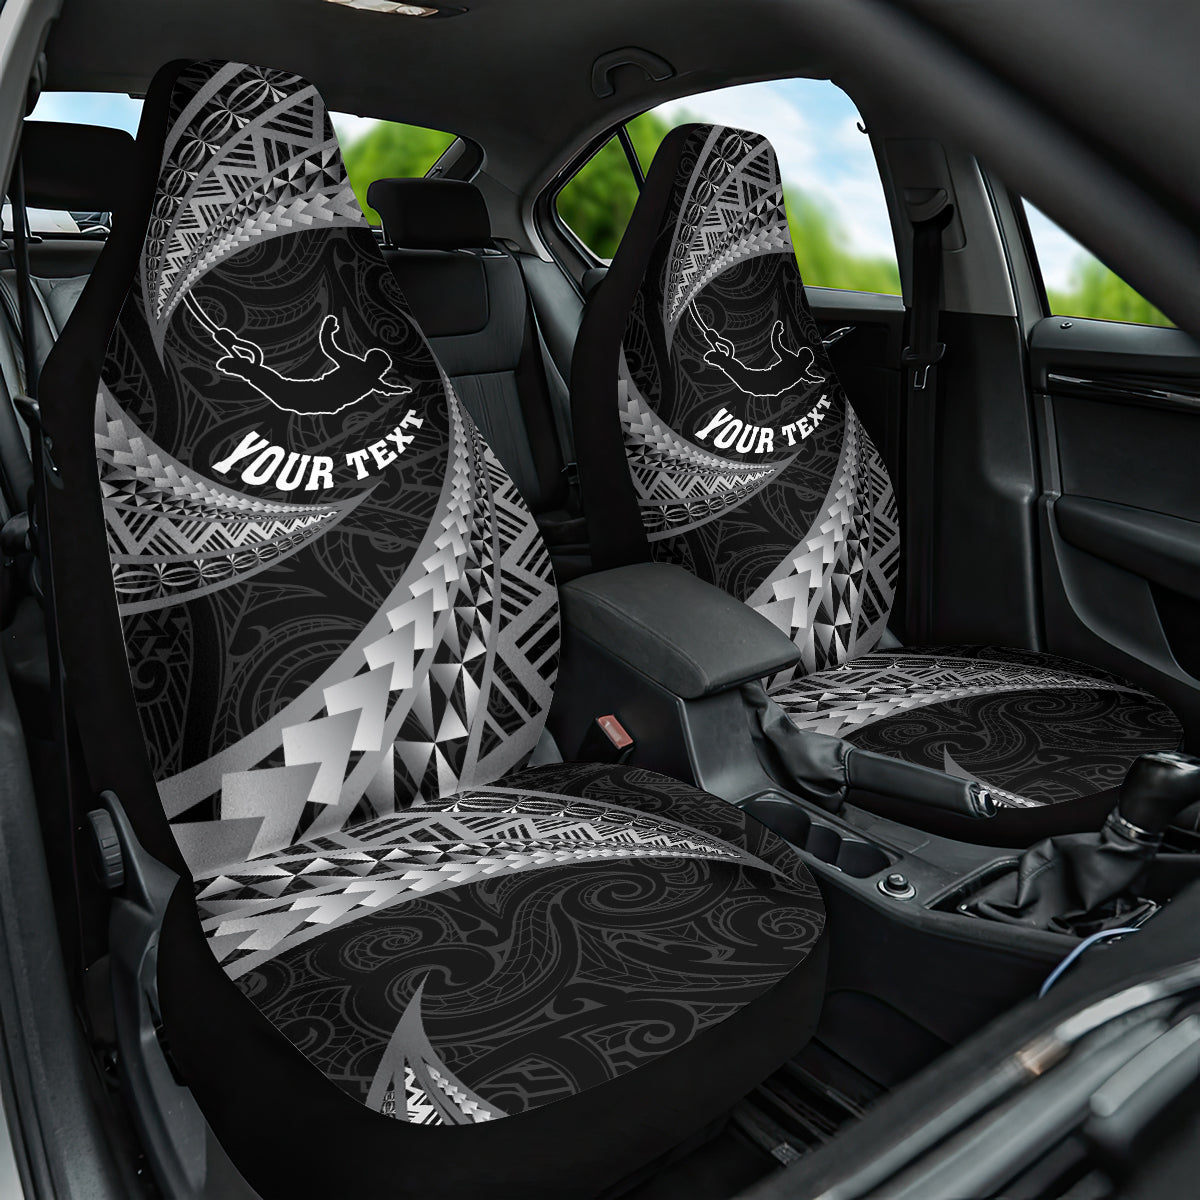 Personalised New Zealand Bungy Jumping Car Seat Cover Maori Pattern LT05 One Size Black - Polynesian Pride